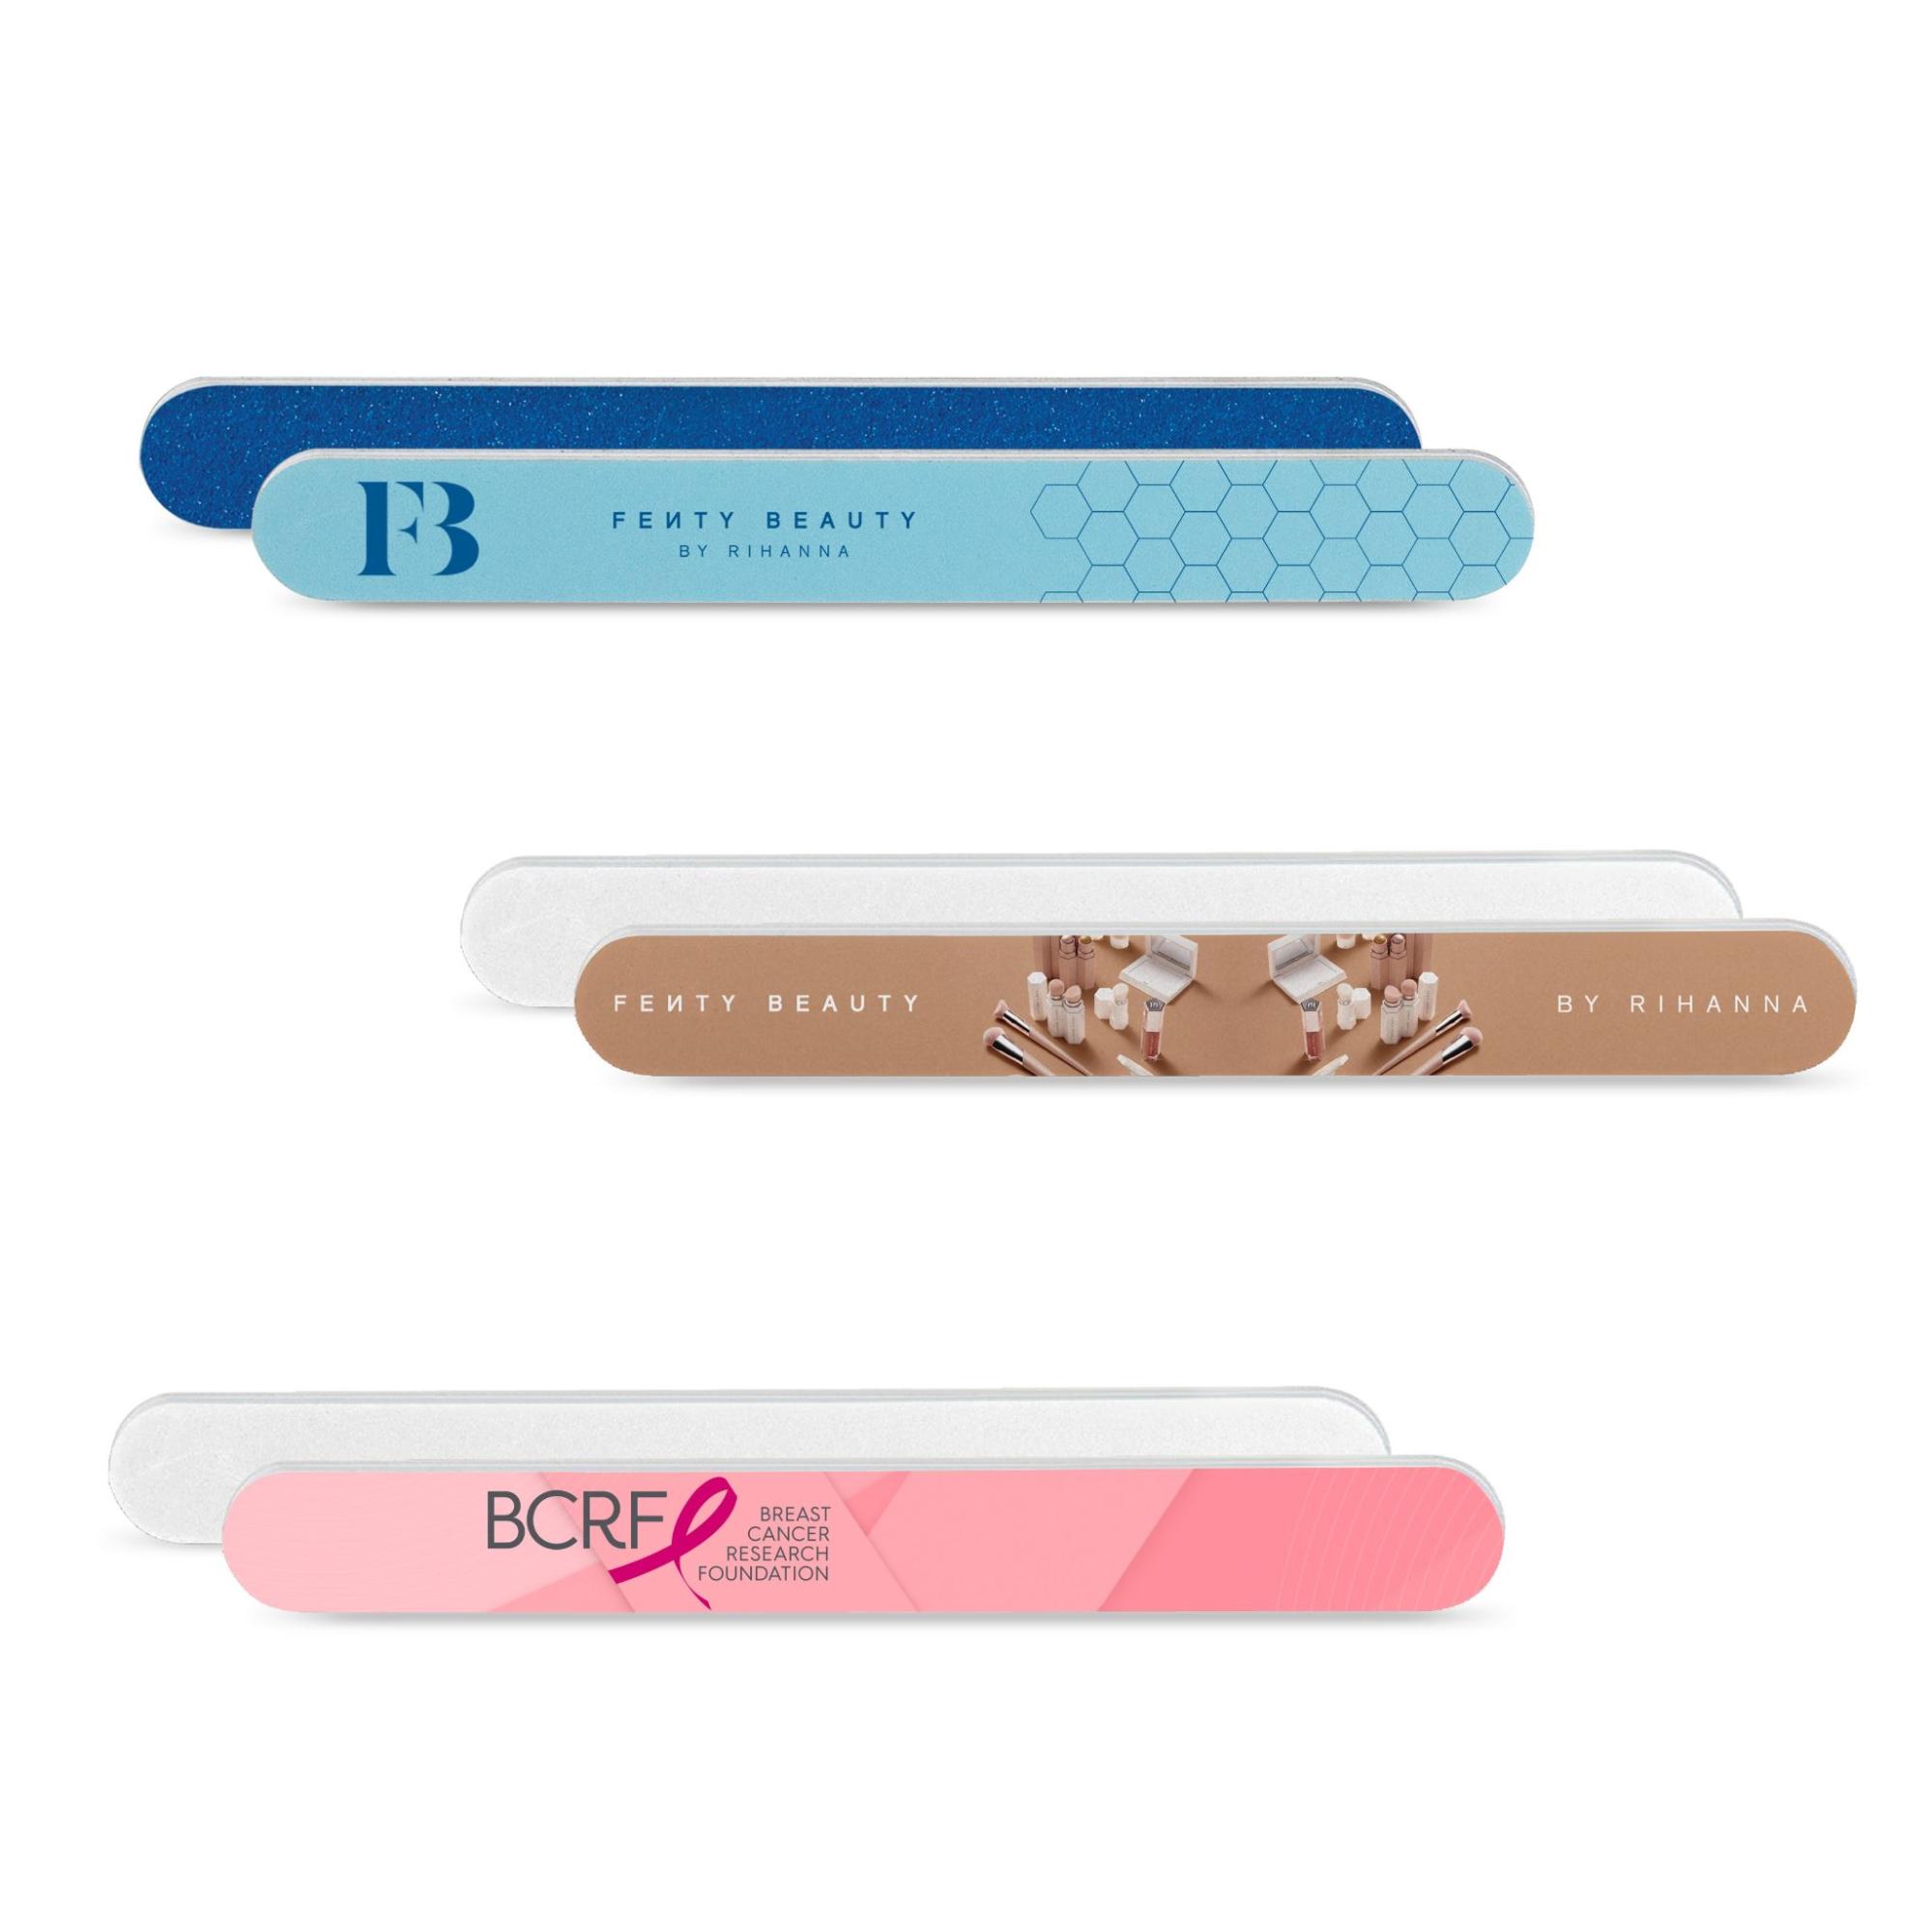 emery board nail files in blue, pink, and brown colors